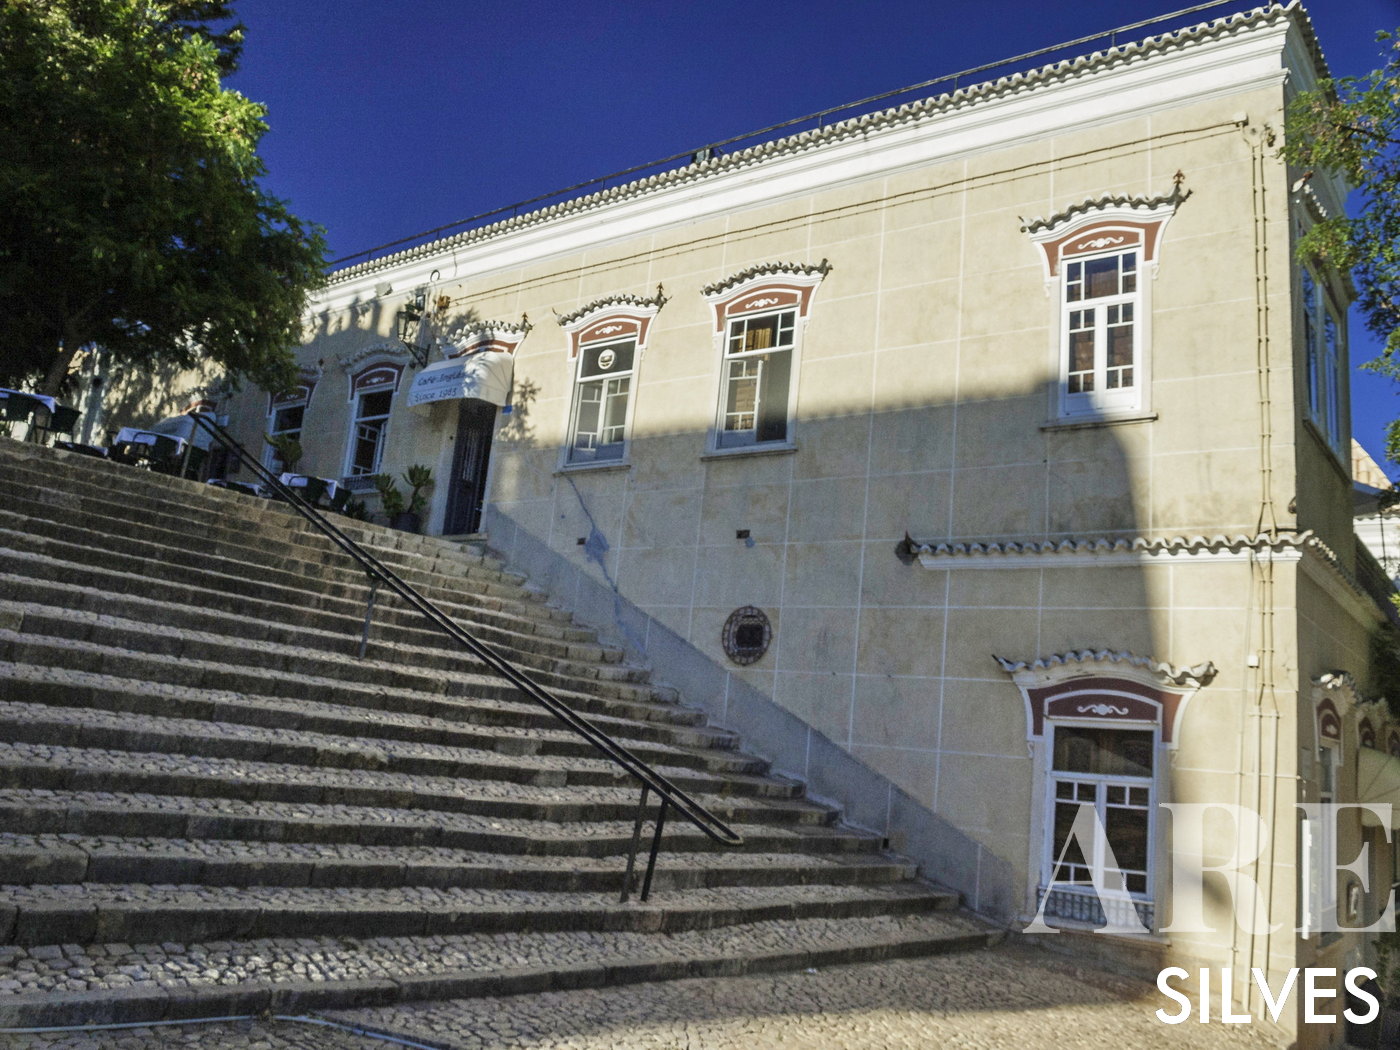 Silves Buildings Adapting to Street Slopes